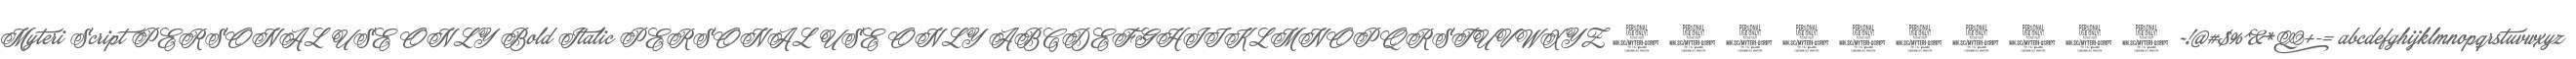 Myteri Script PERSONAL USE ONLY Bold Italic PERSONAL USE ONLY